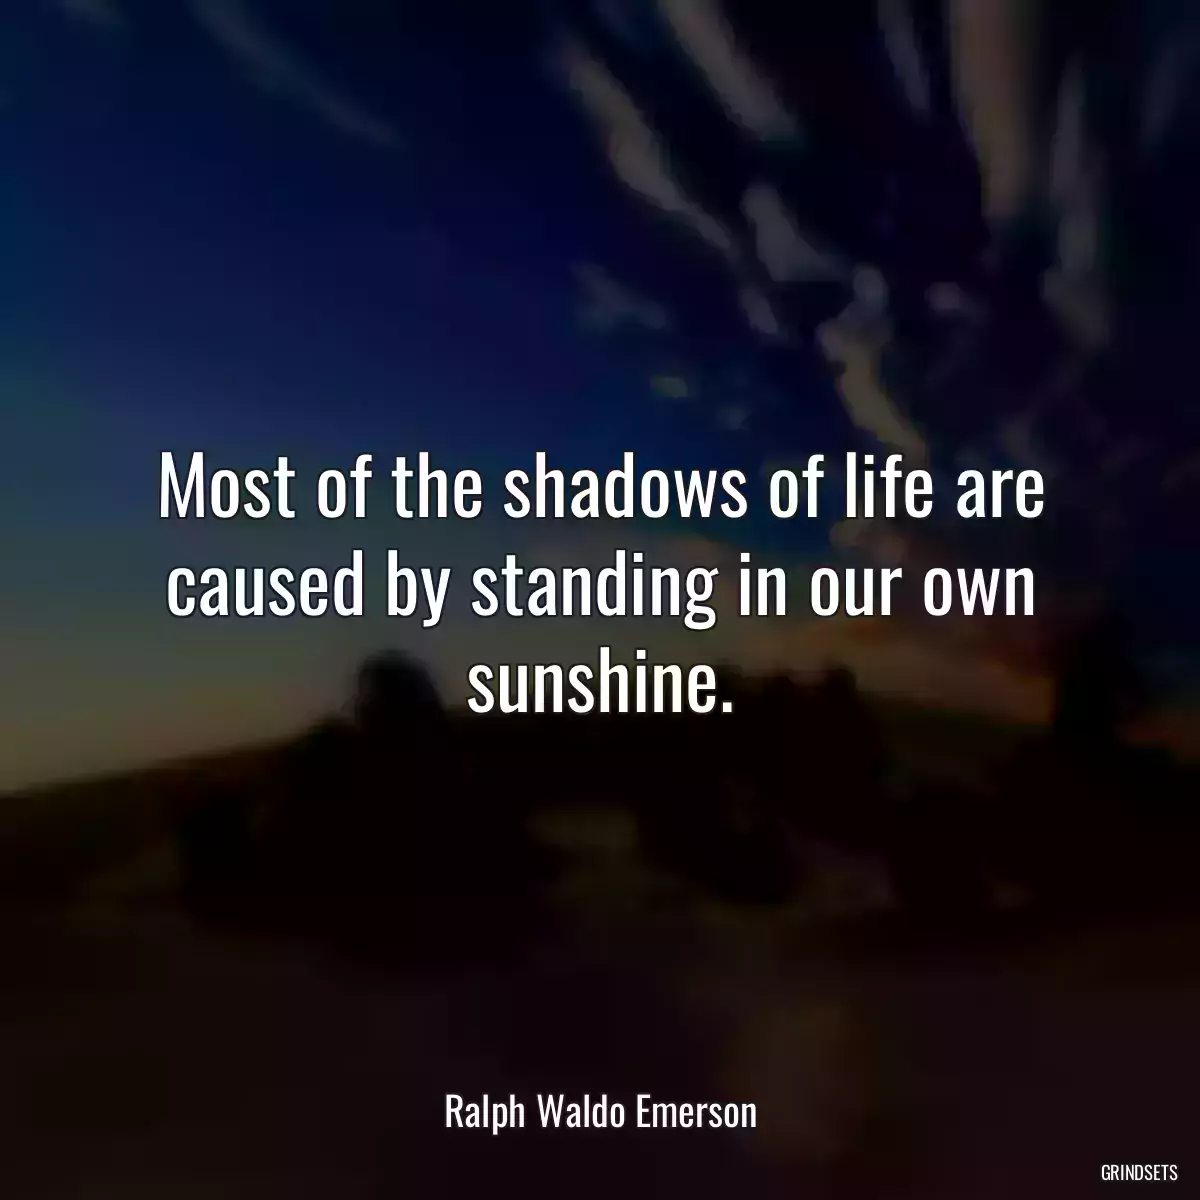 Most of the shadows of life are caused by standing in our own sunshine.